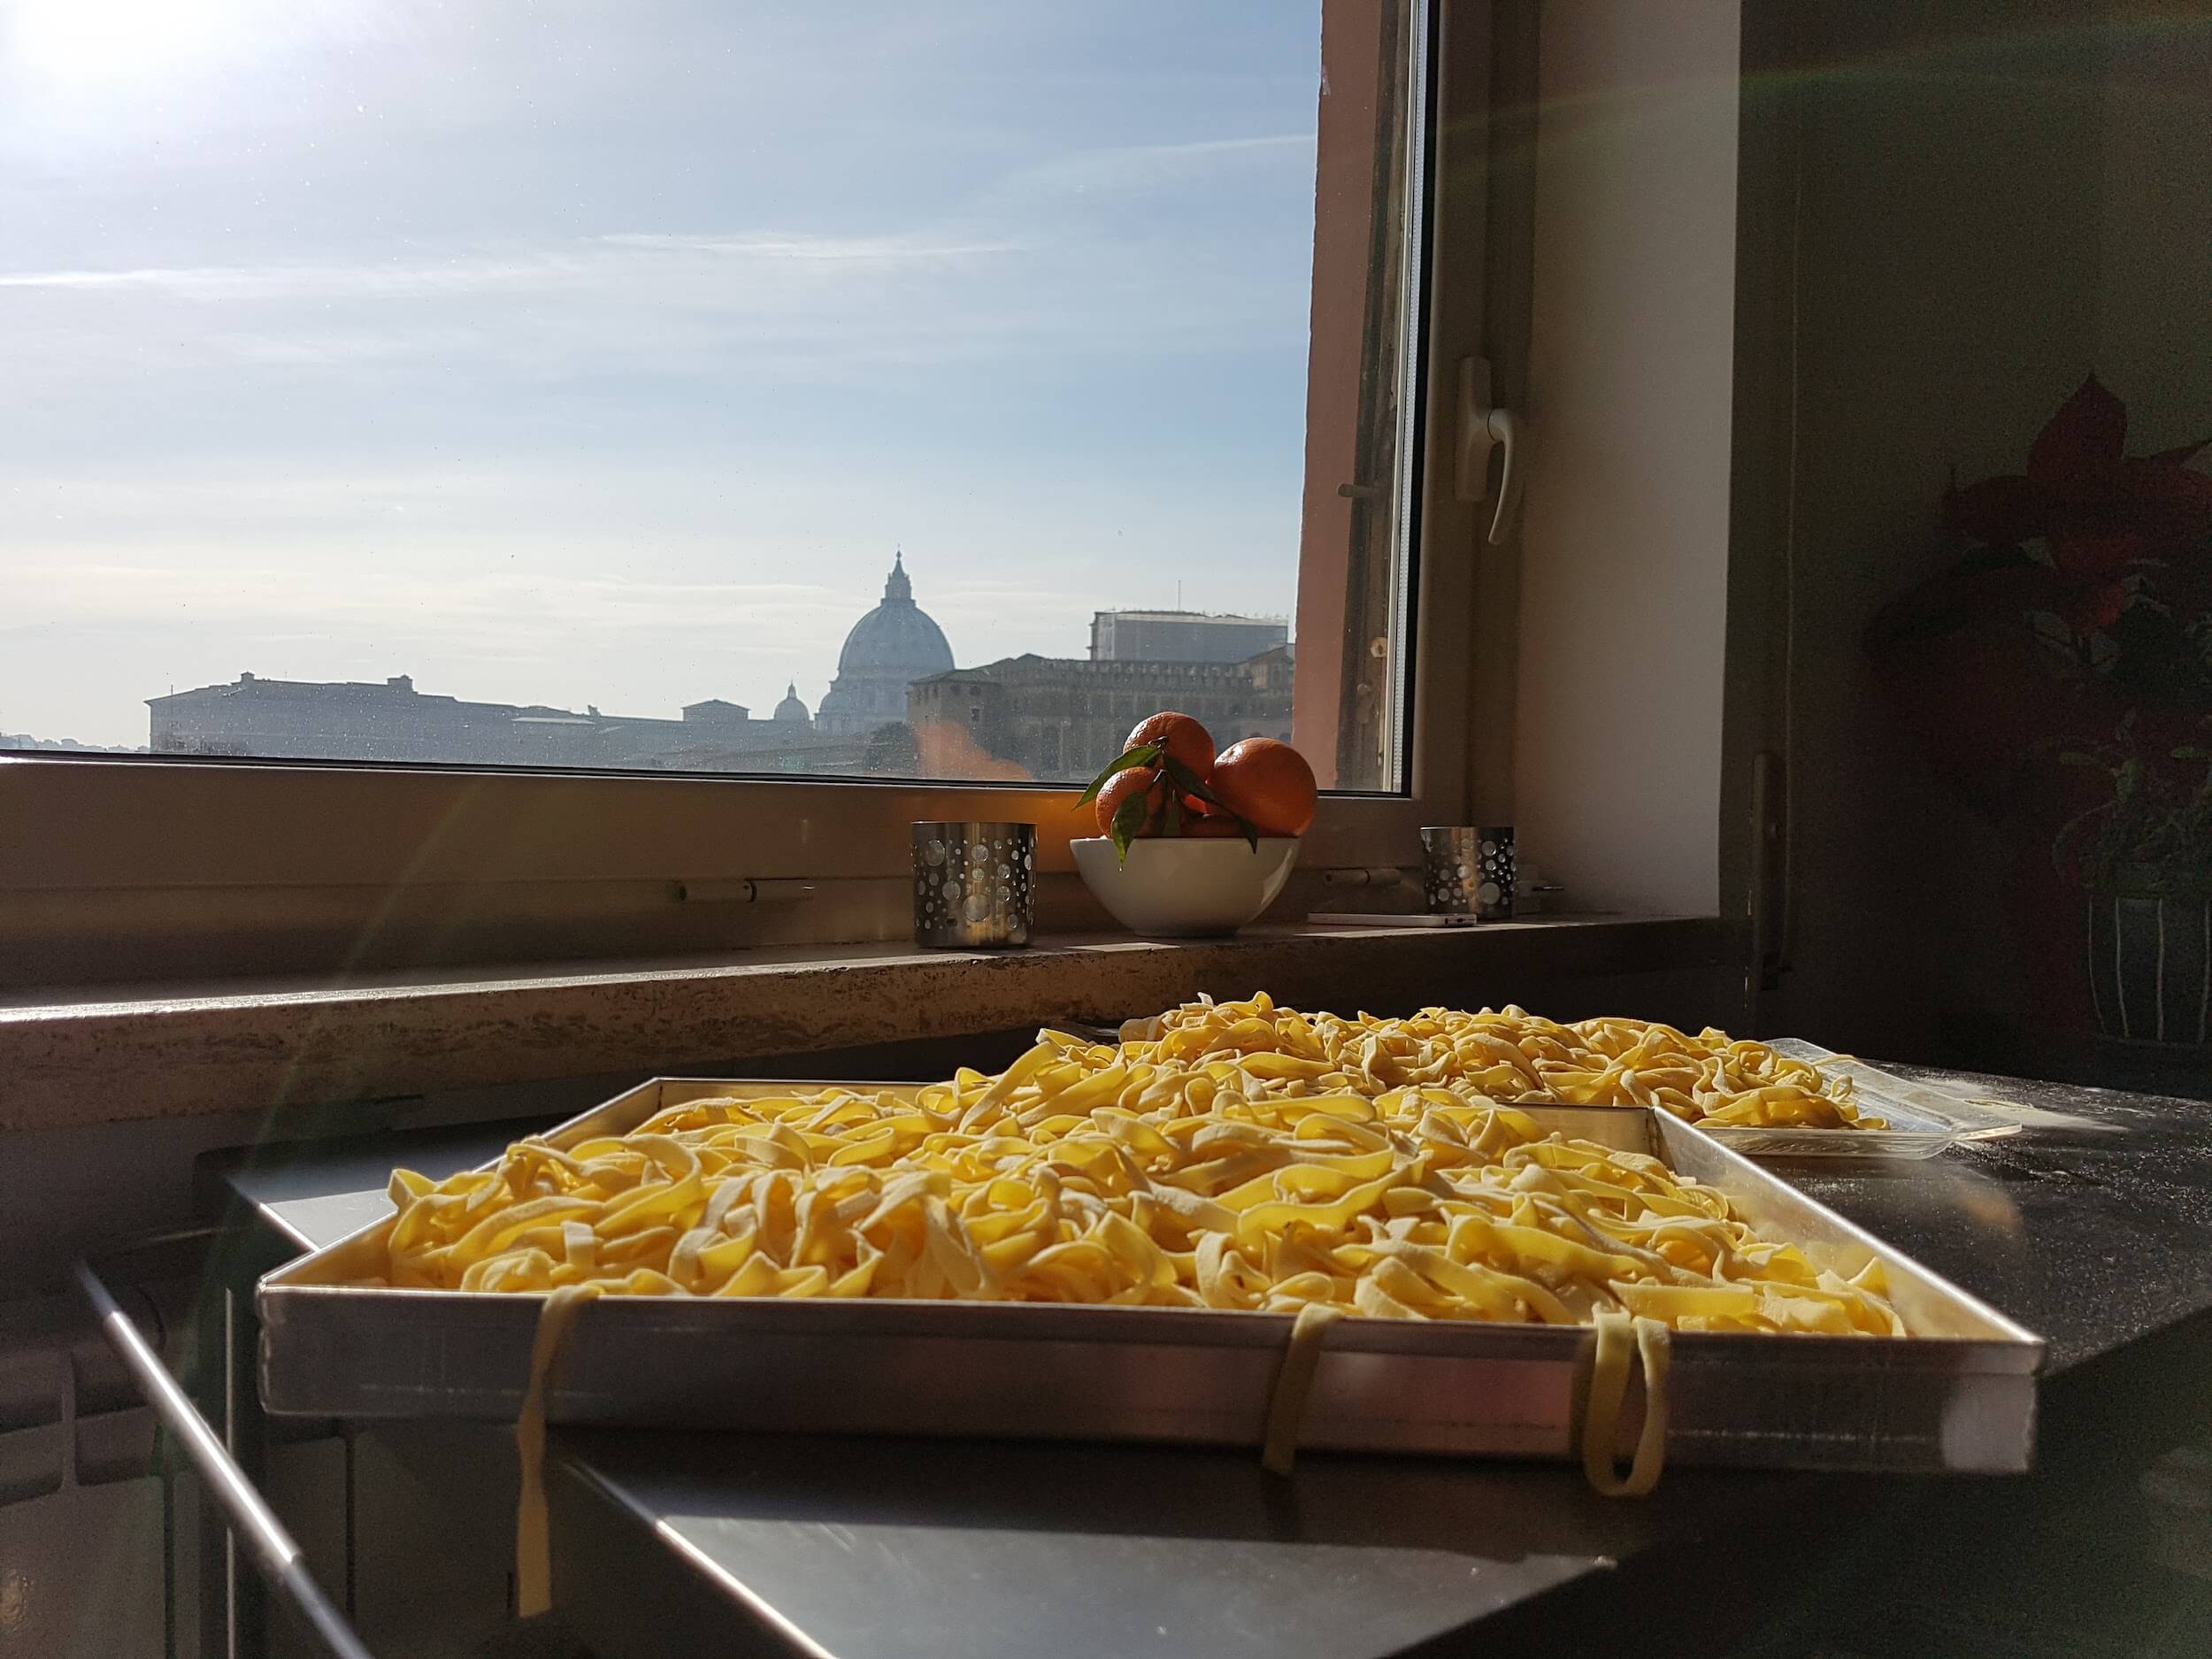 Trays of Fettuccine pasta with a view of the Vatican onthebackground